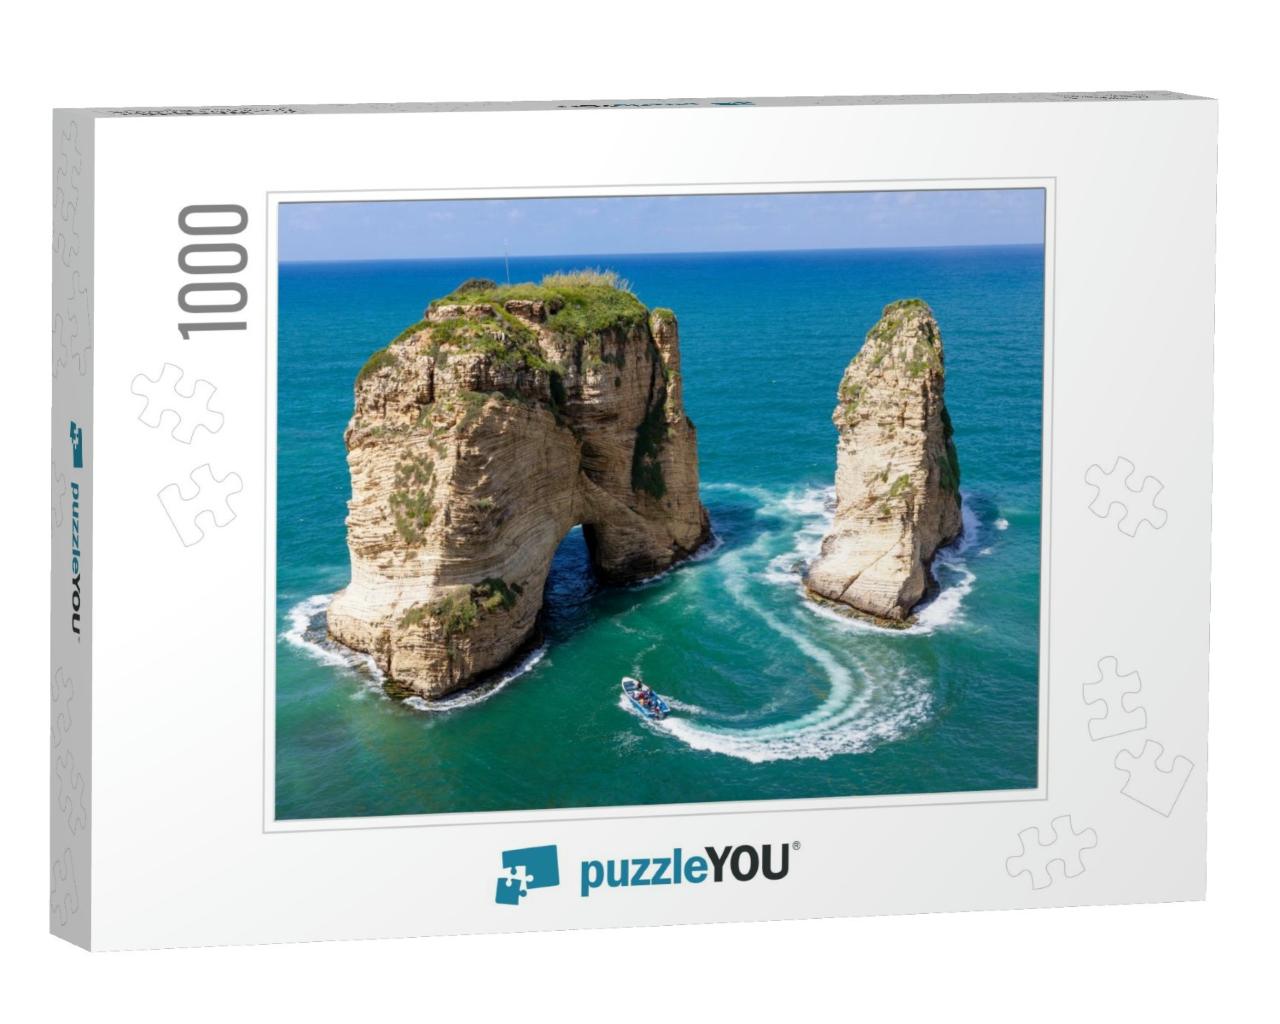 Rouche Rocks in Beirut, Lebanon in the Sea During Daytime... Jigsaw Puzzle with 1000 pieces